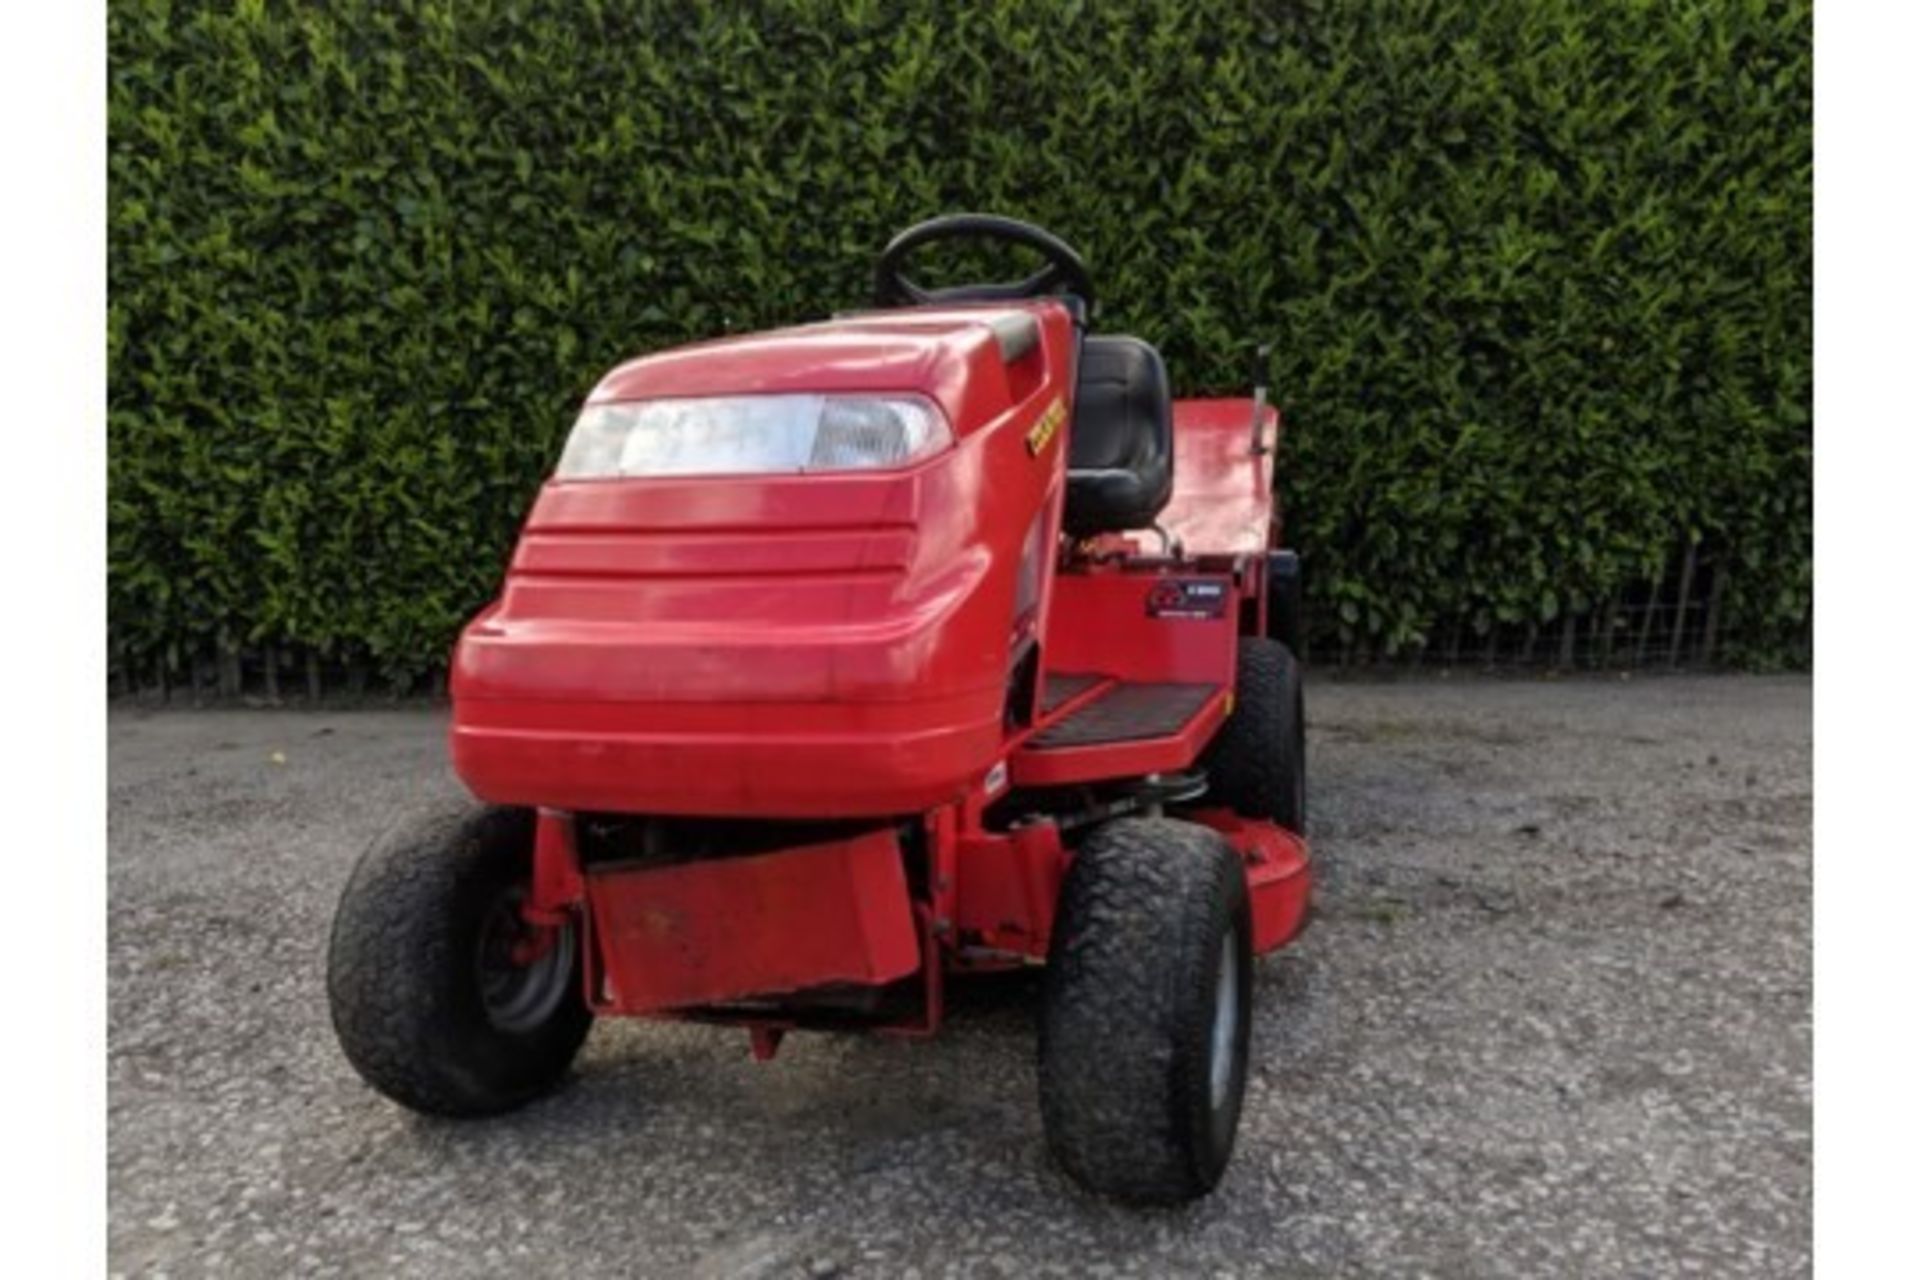 Countax C400H 38" Rear Discharge Garden Tractor With PGC - Image 2 of 7